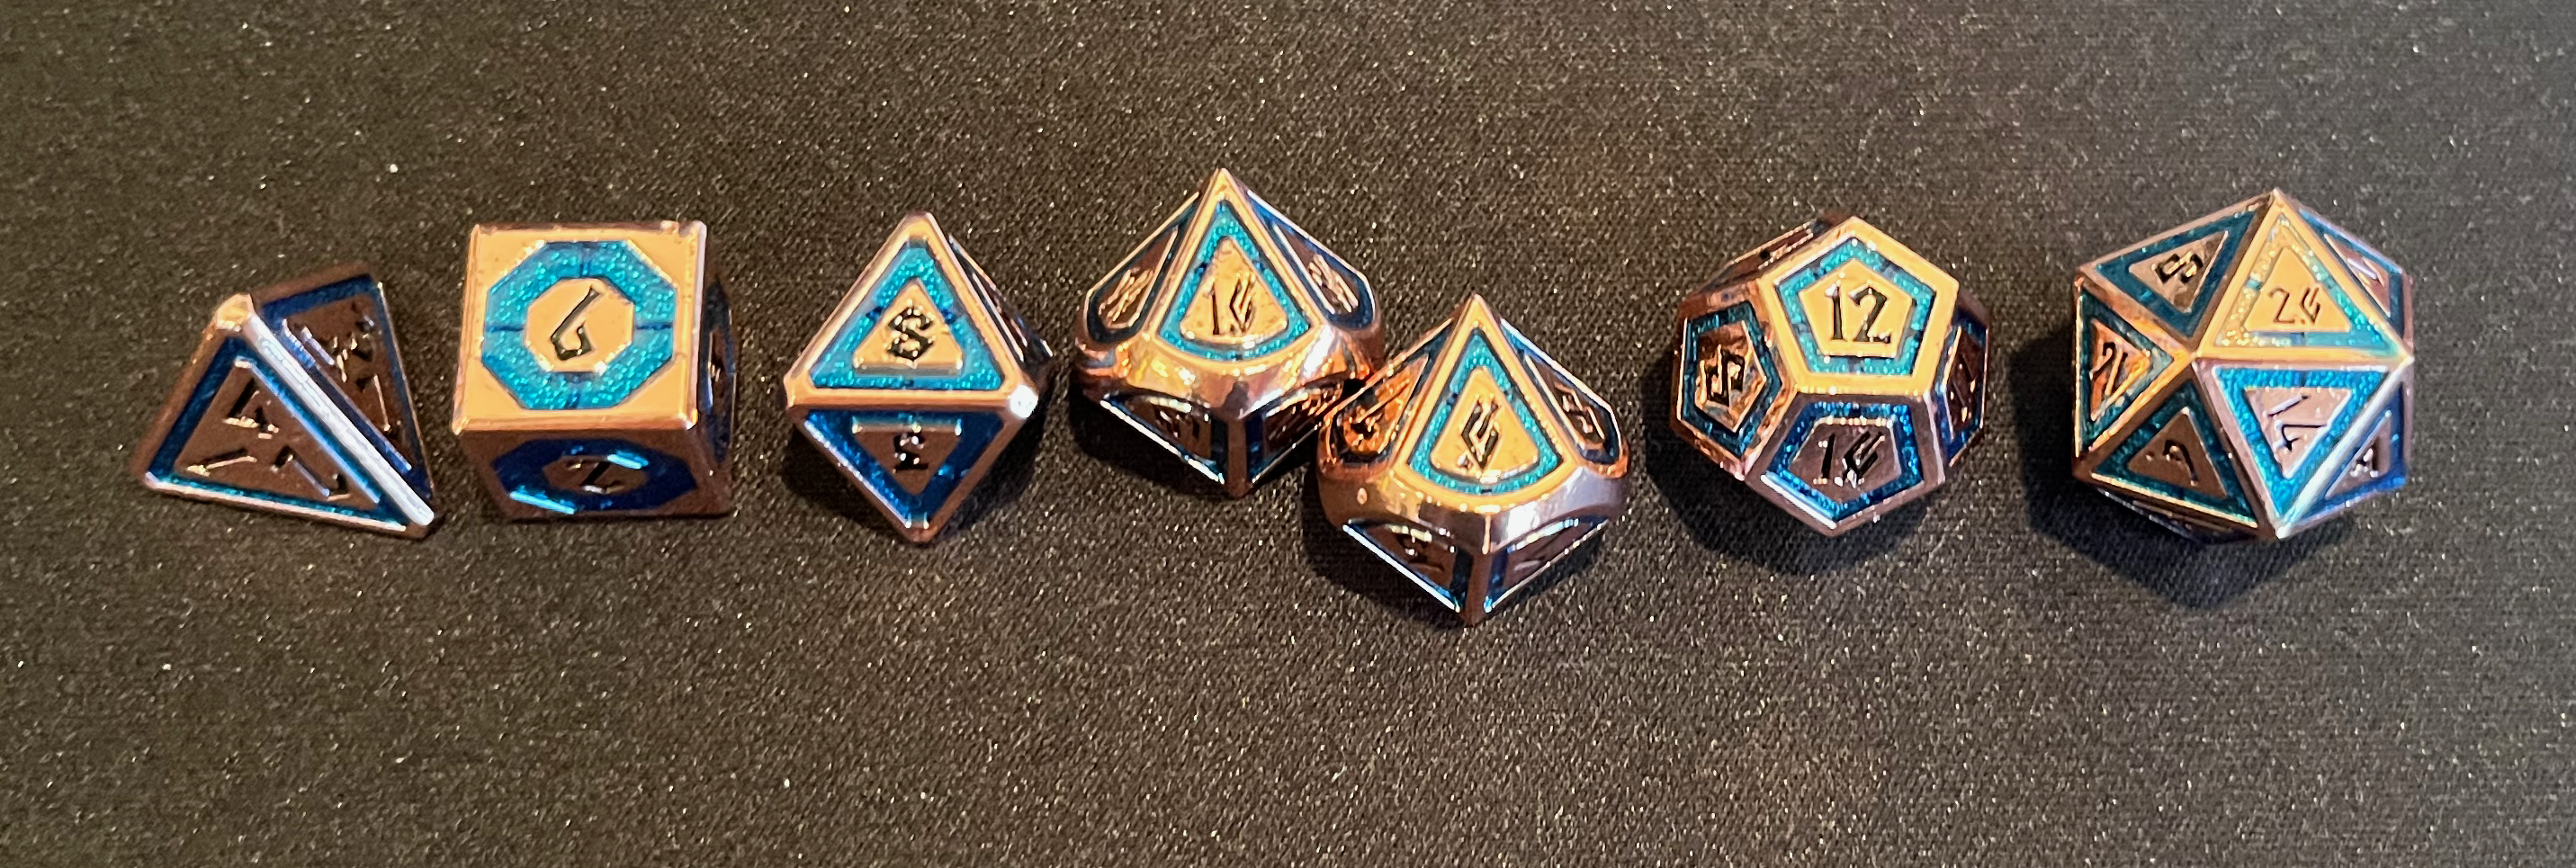 A set of 7 copper-and-blue metal dice seen from above. They have a Nordic/runic-inspired font face.